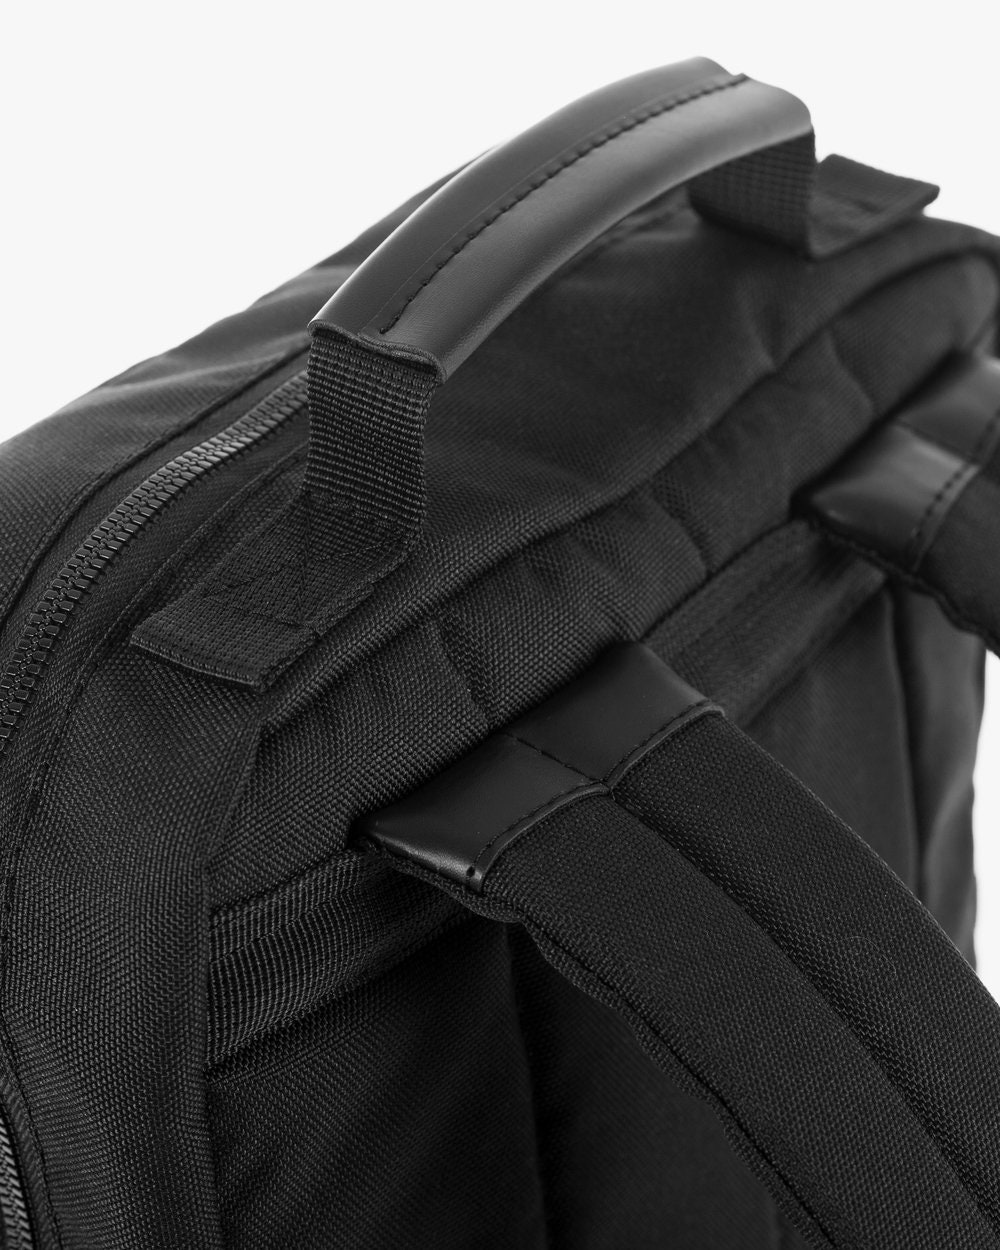 Classic Backpack Laptop Bag With Anti-theft Pocket Large | Etsy